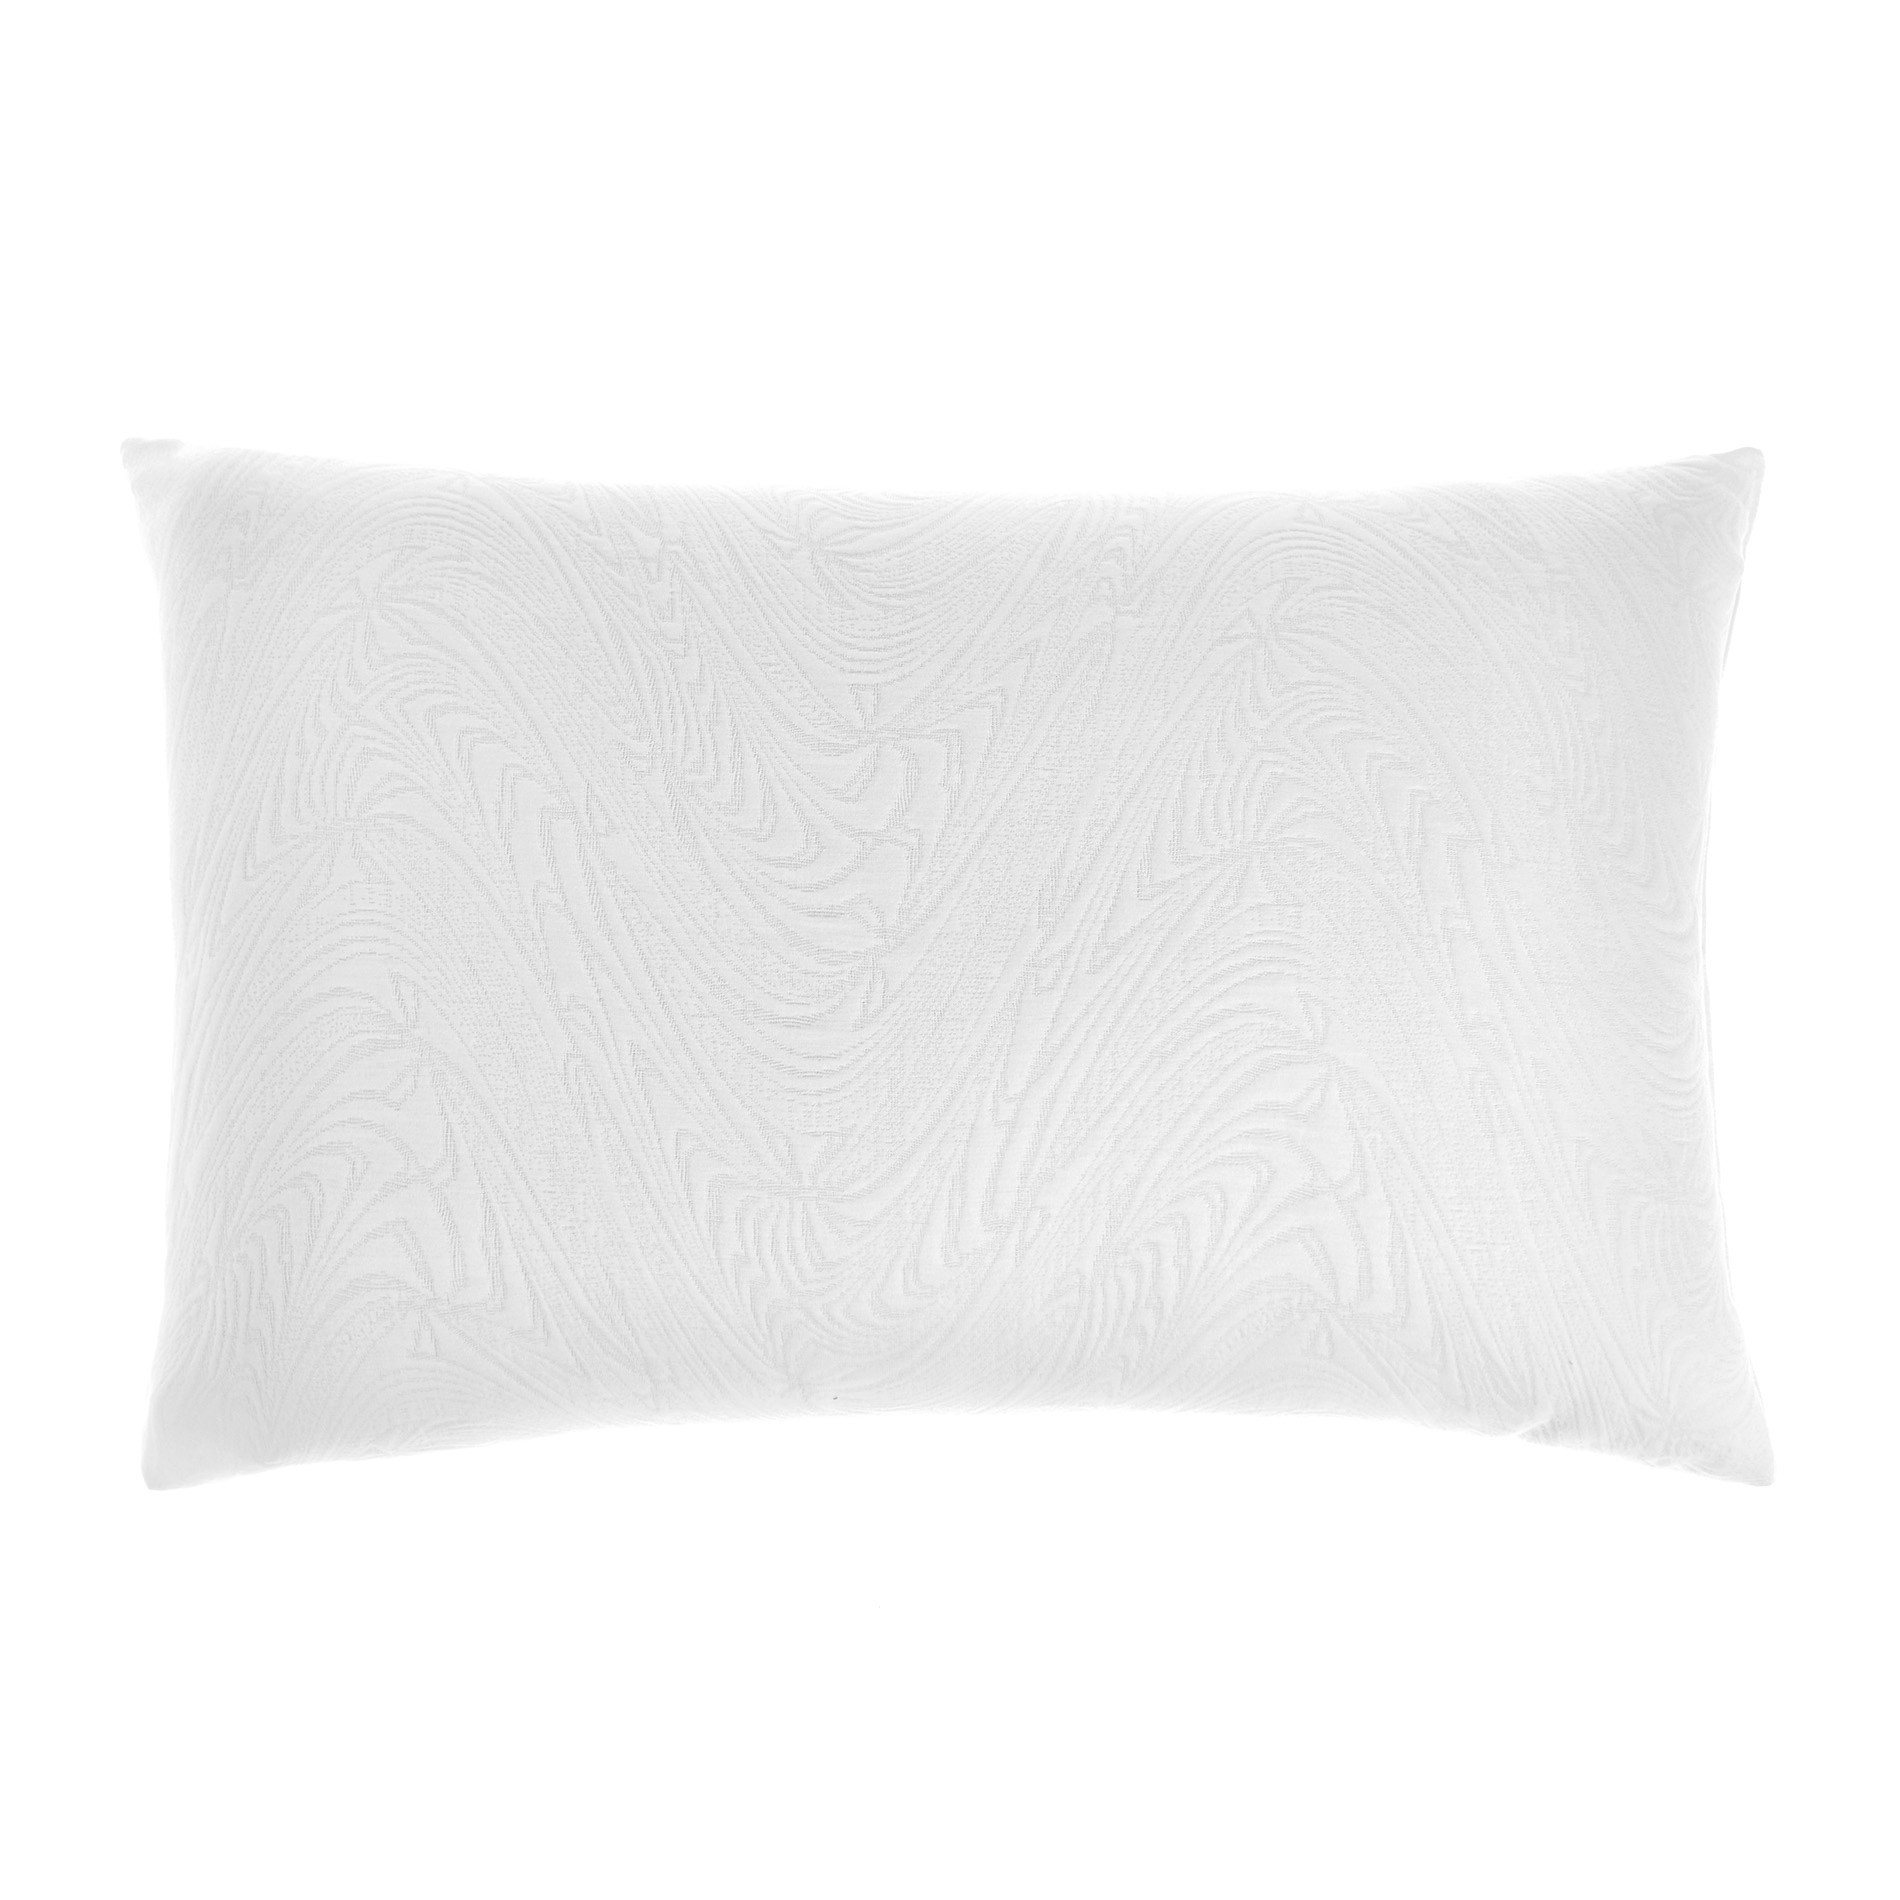 Sprung pillow, White, large image number 0